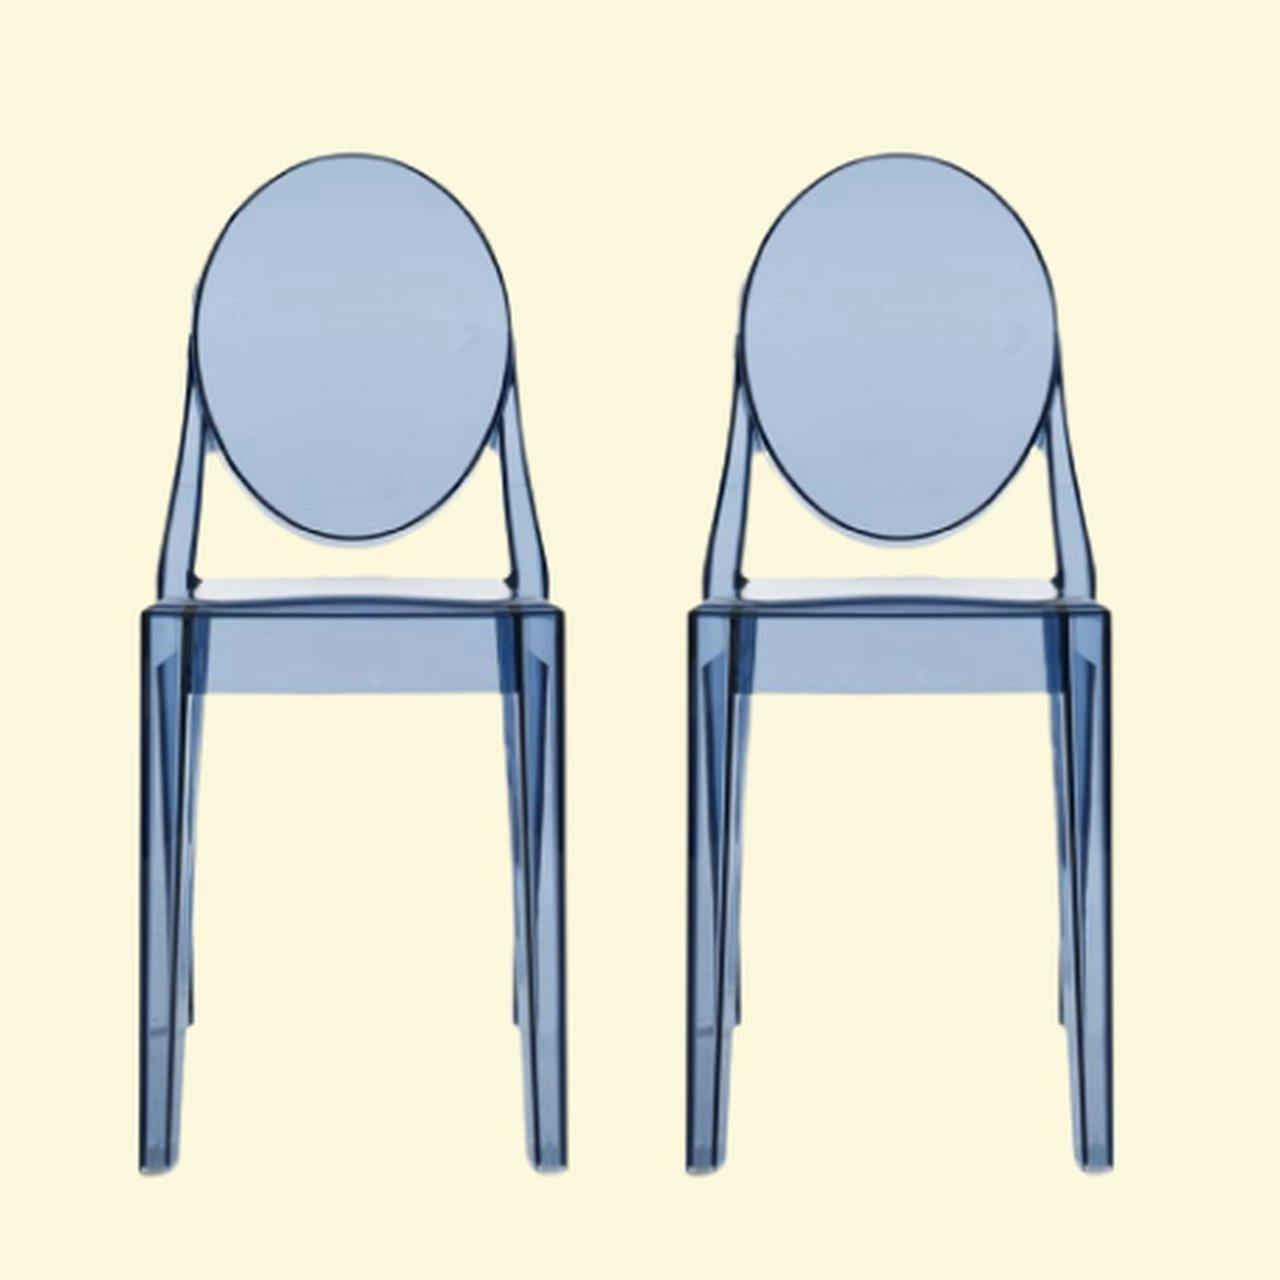 Mobler Dining chairs